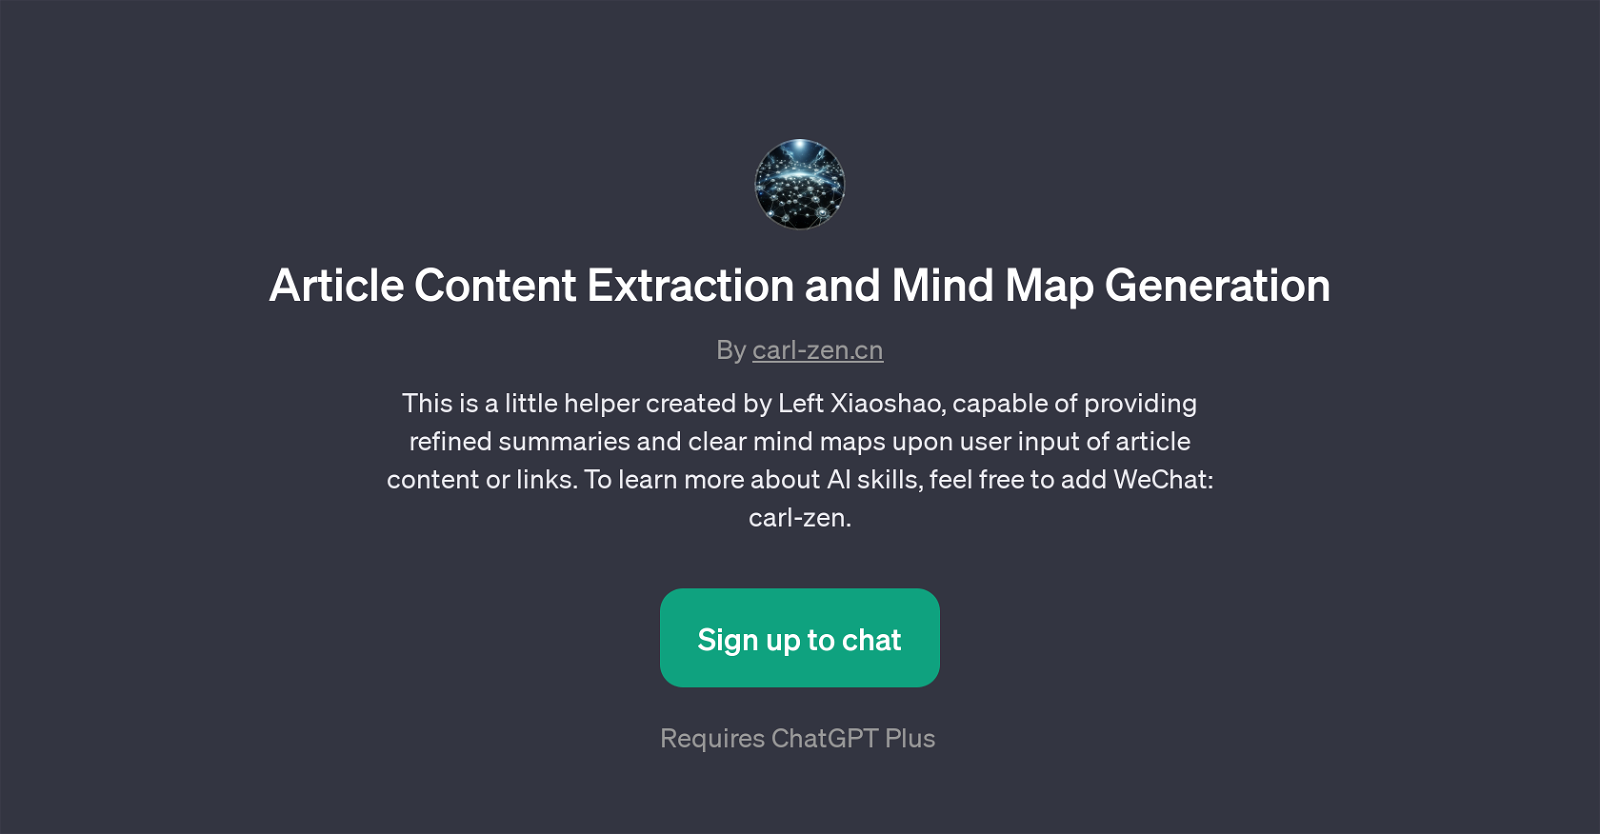 Article Content Extraction and Mind Map Generation website